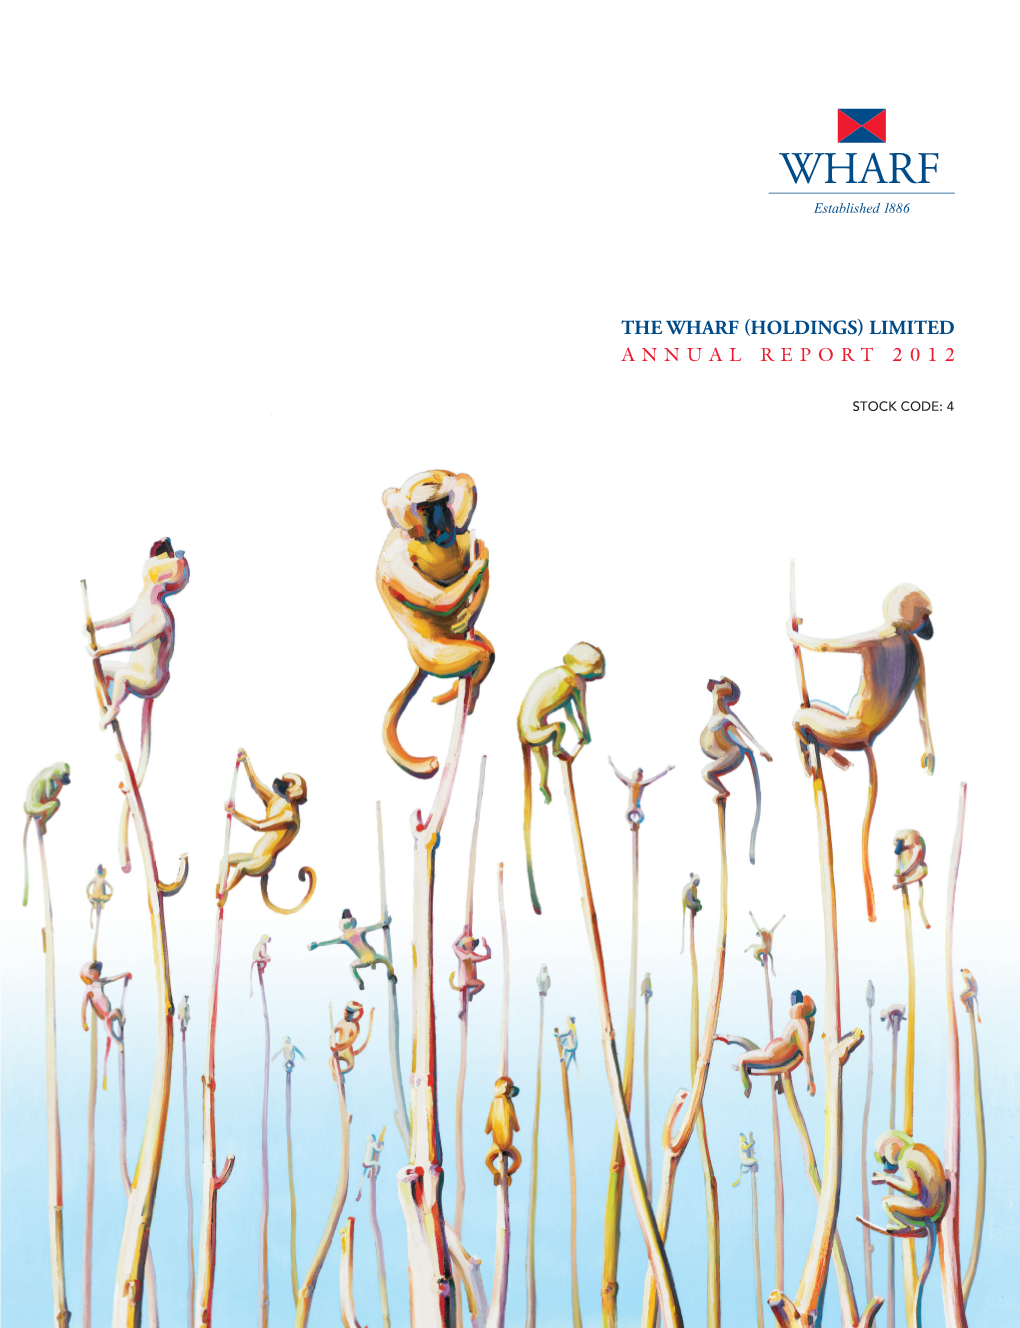 Annual Report 2012 / the Wharf (Holdings) Limited